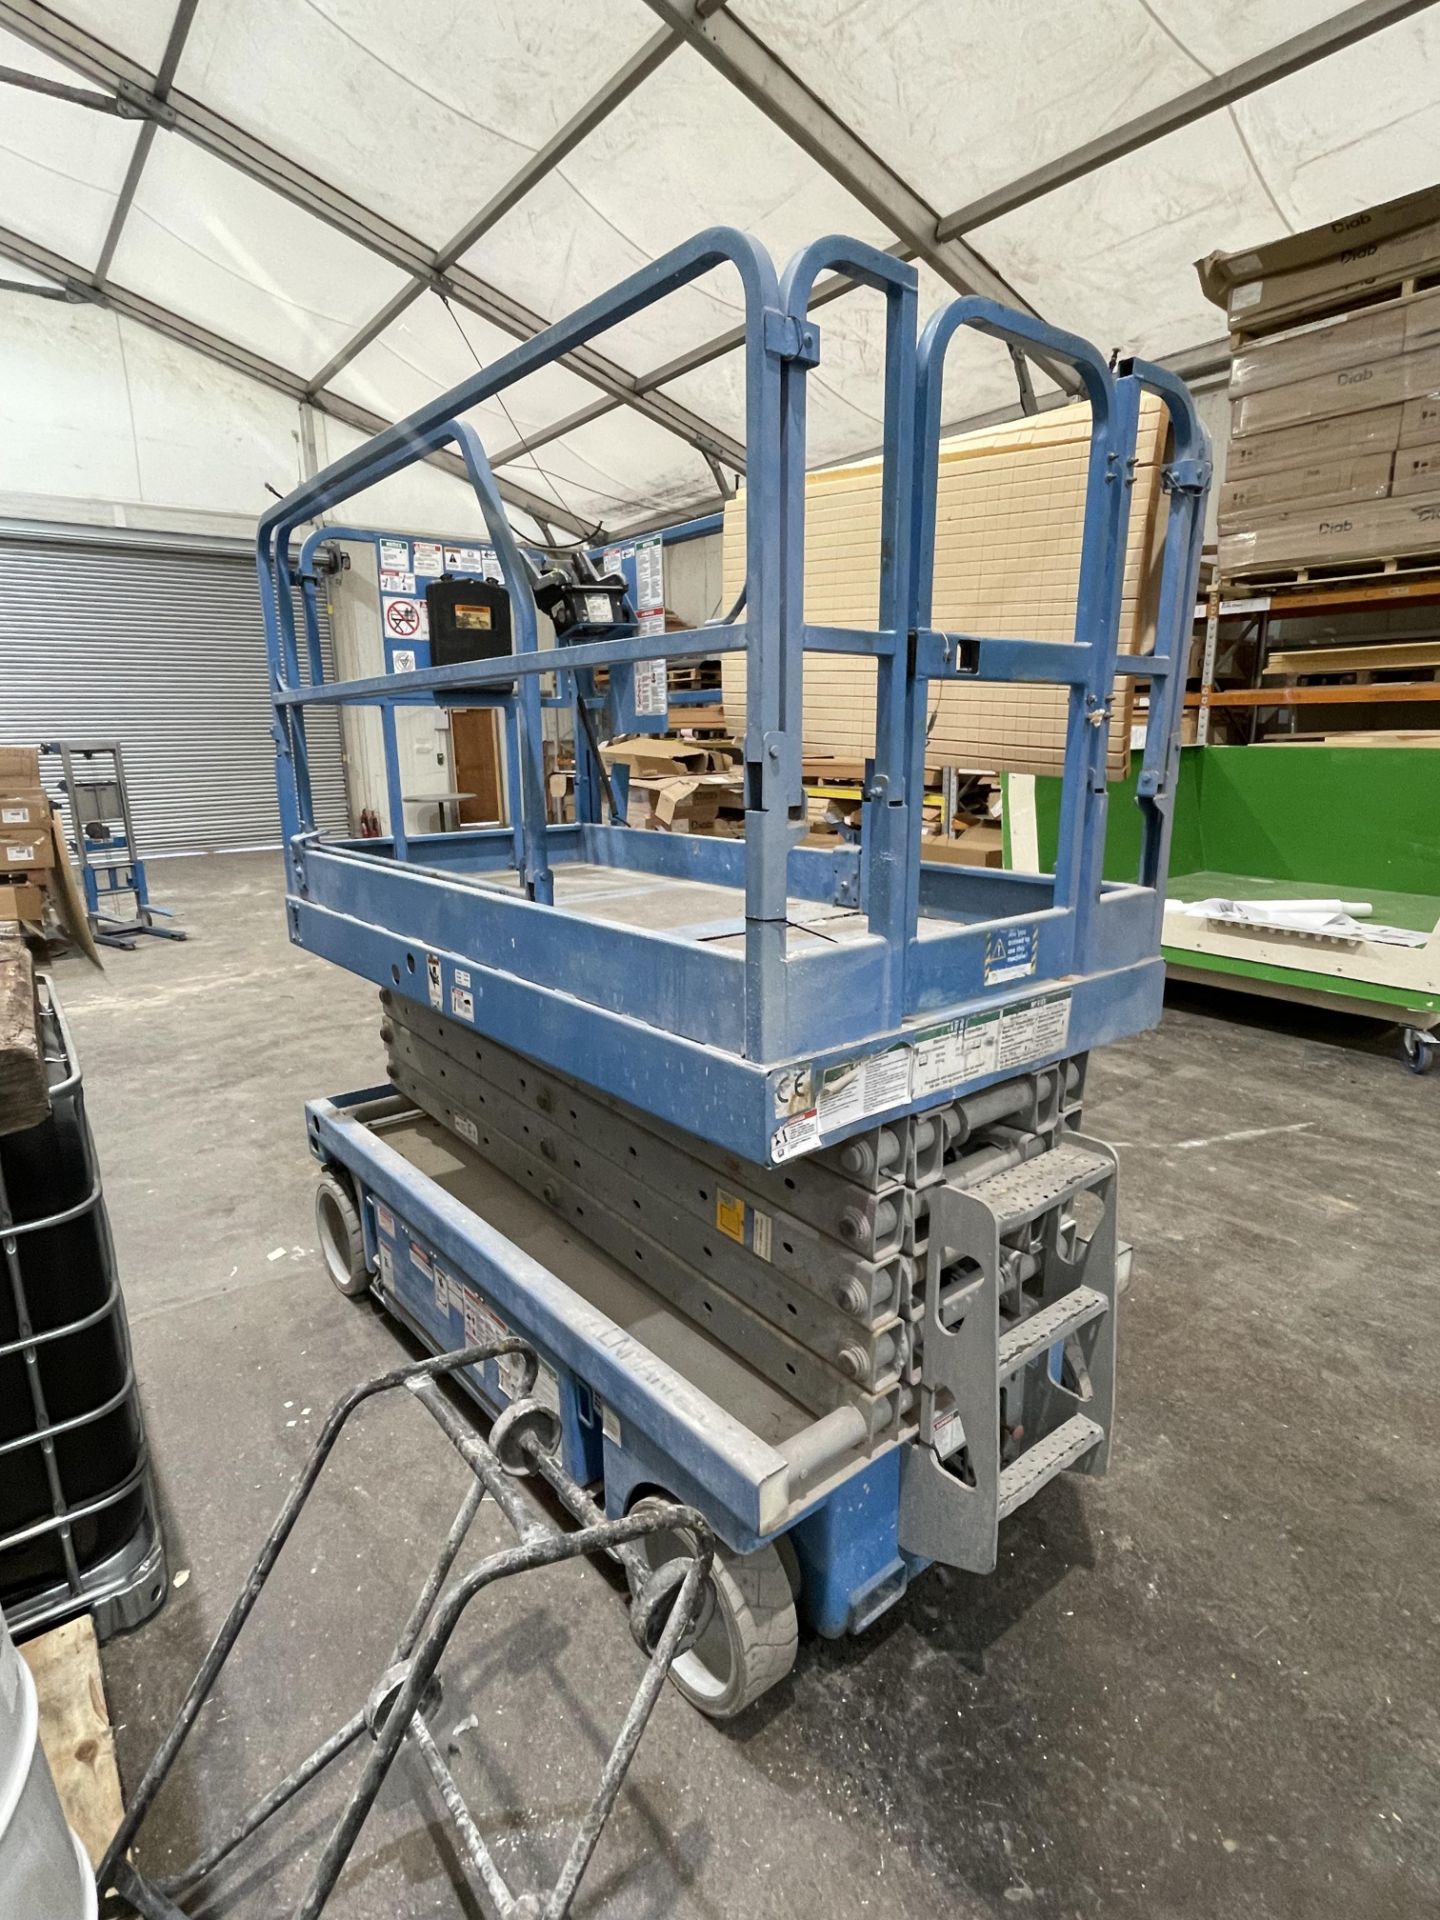 Genie GS-3246 Electric Scissor Lift, 11.75m Working Height, Run Hours: 699, S/No. GS46-48405 - Image 3 of 8